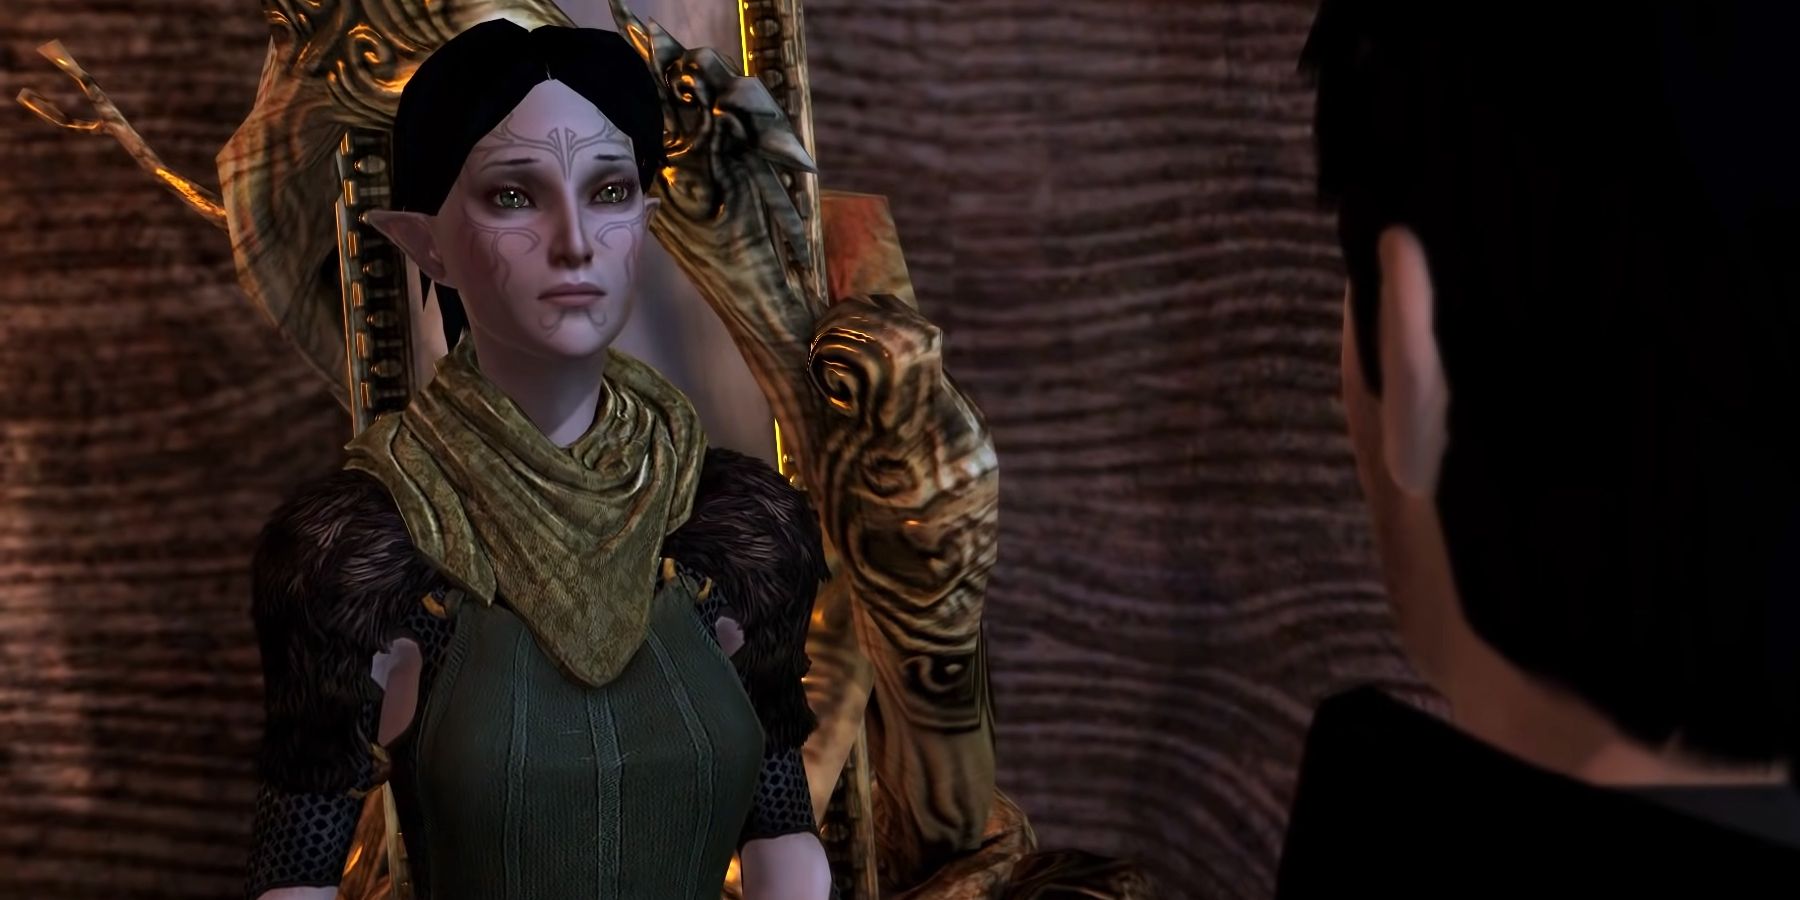 Dragon Age 2 Merrill and her Eluvian